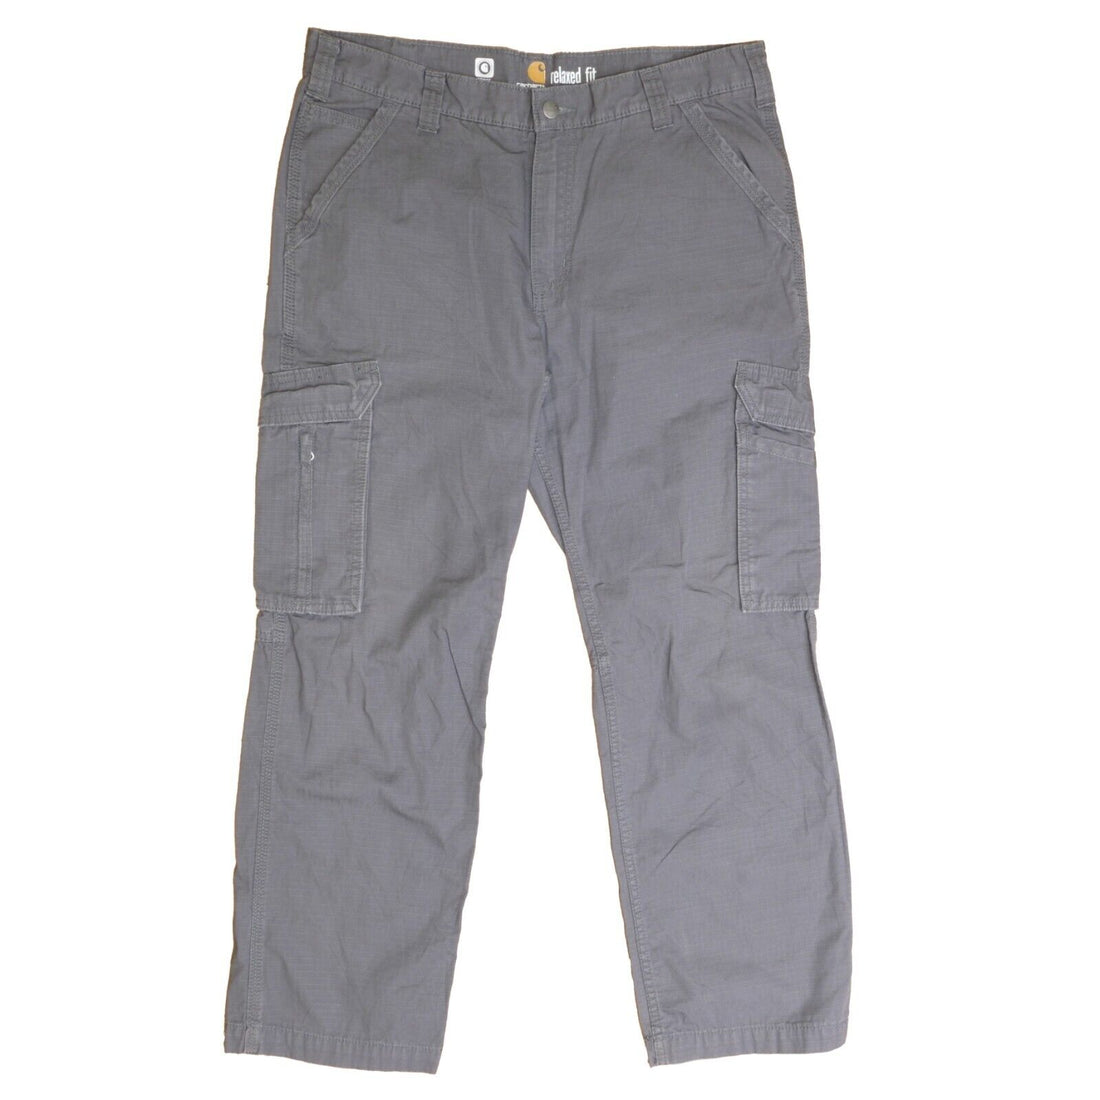 Carhartt Rip Stop Cargo Pants Size 36 X 30 Gray Relaxed Fit